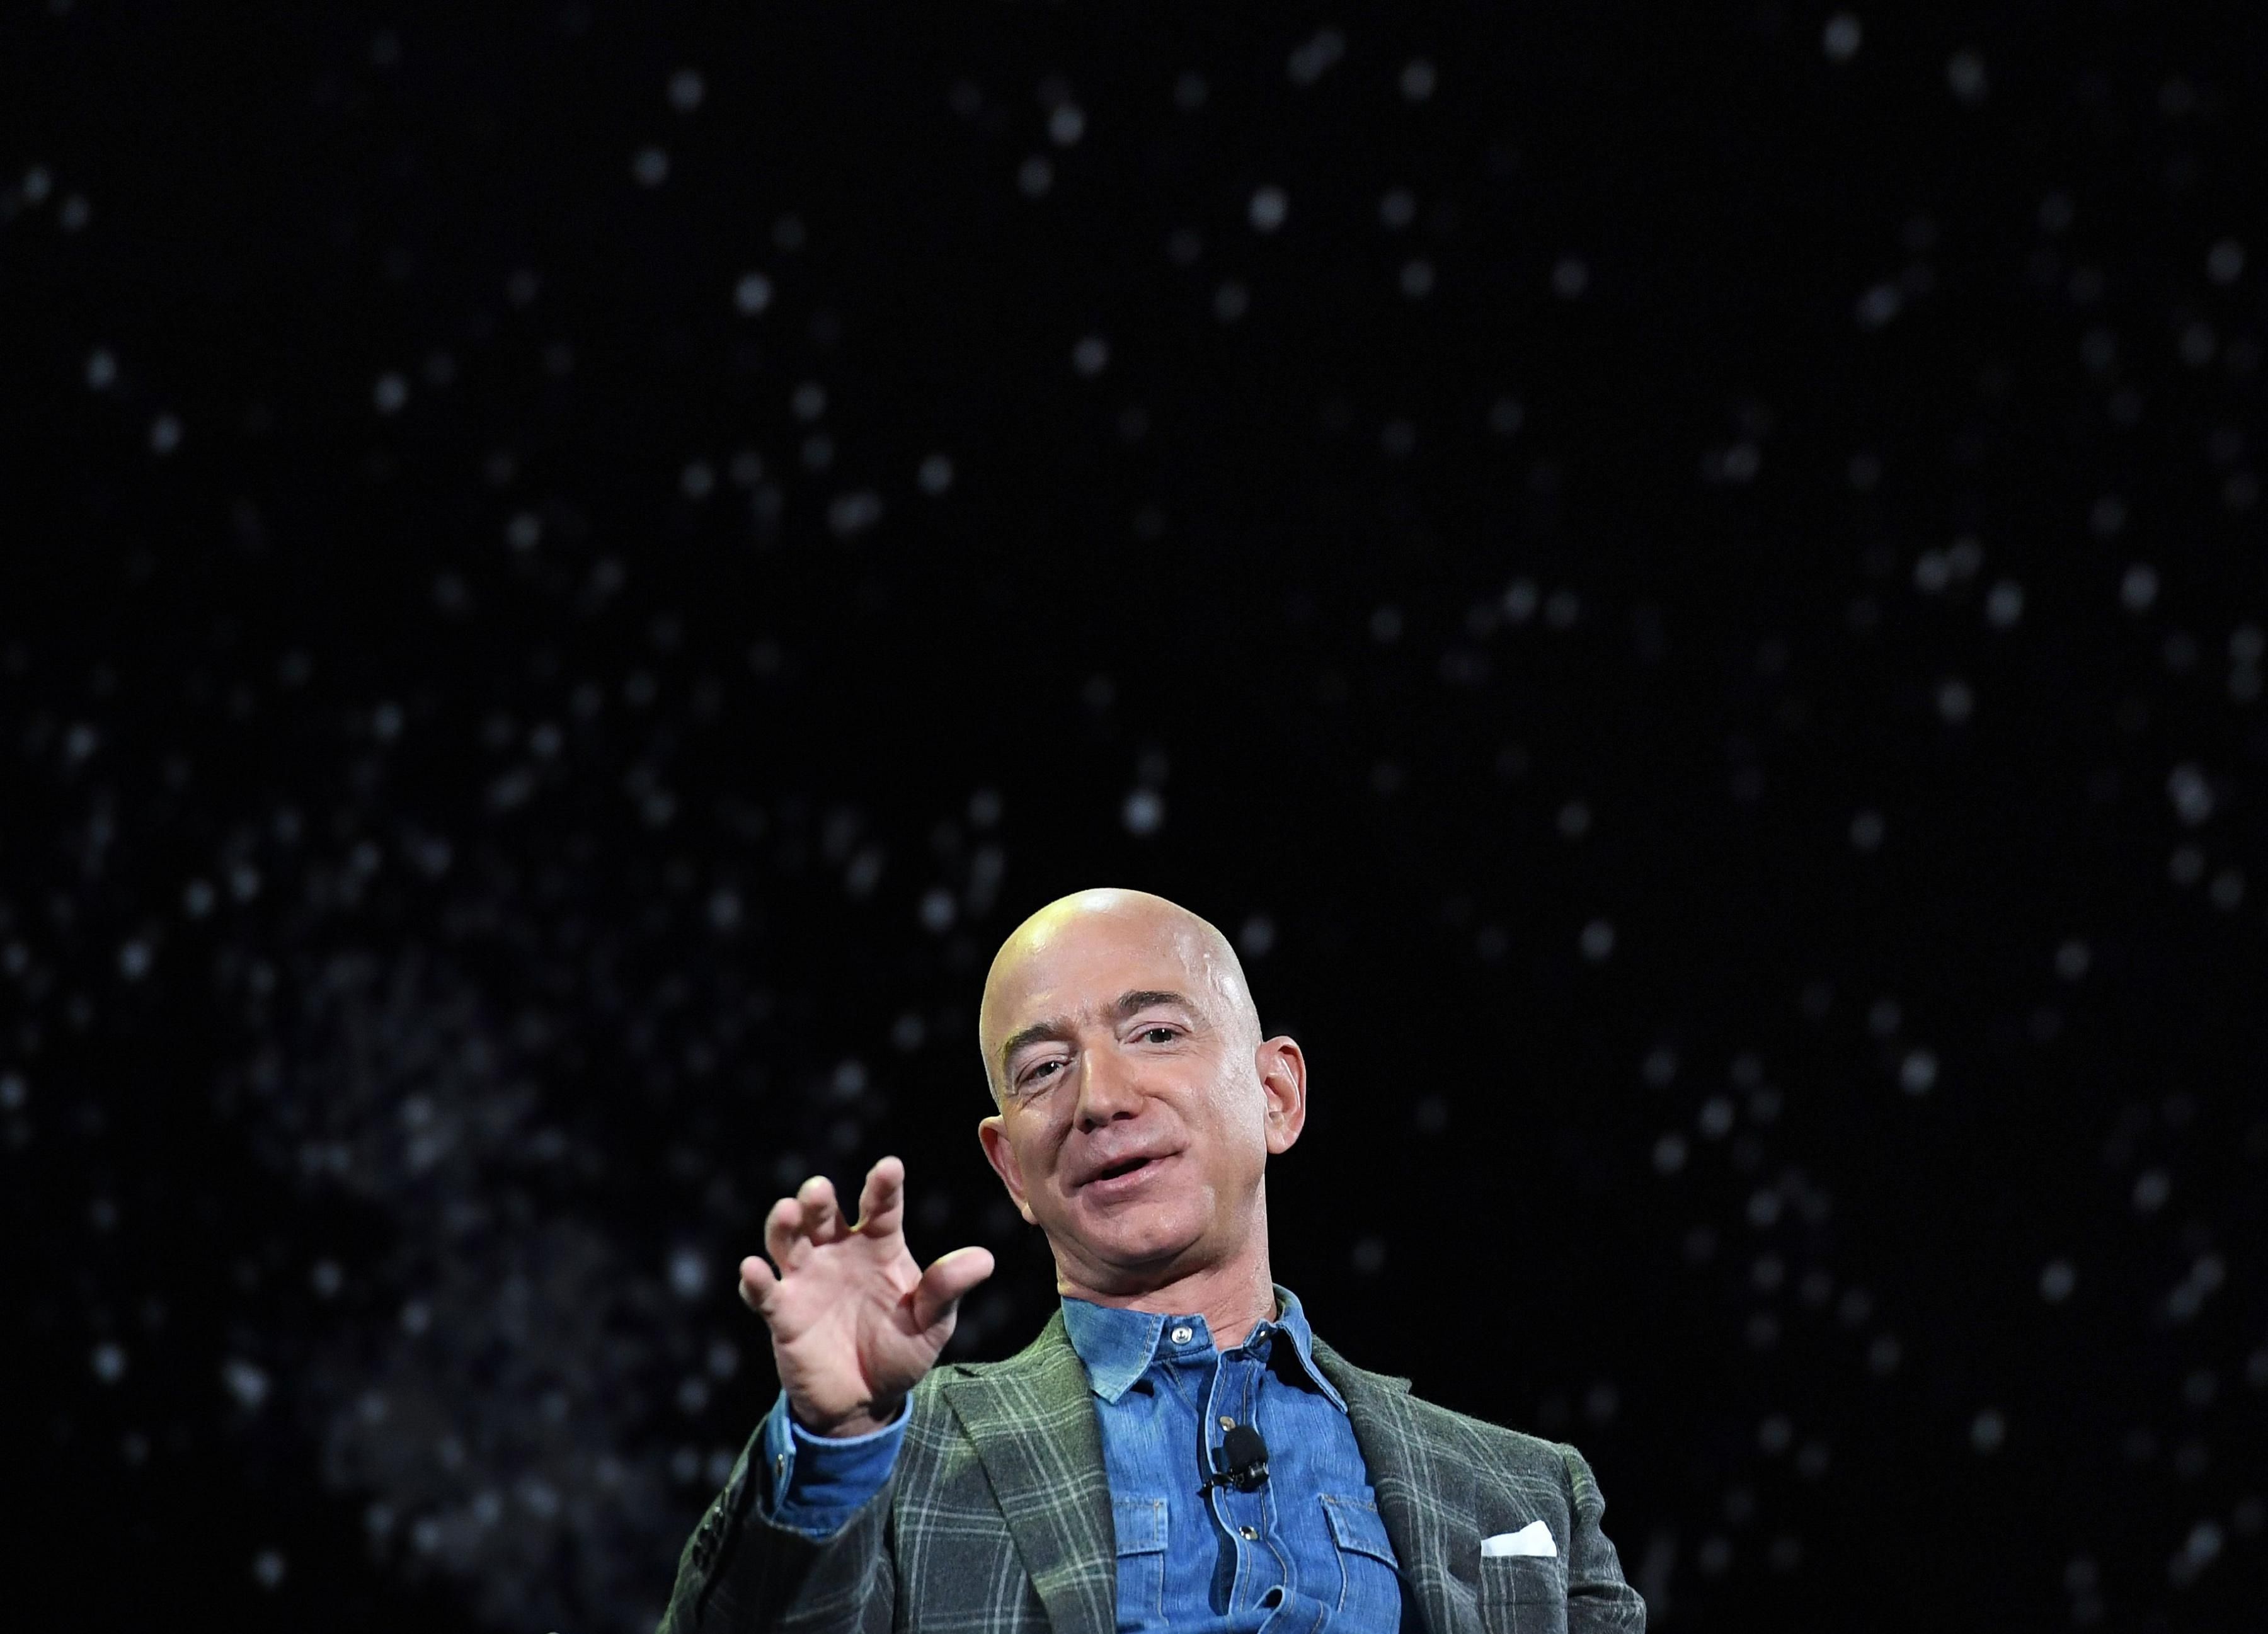 Jeff Bezos speaks at an event